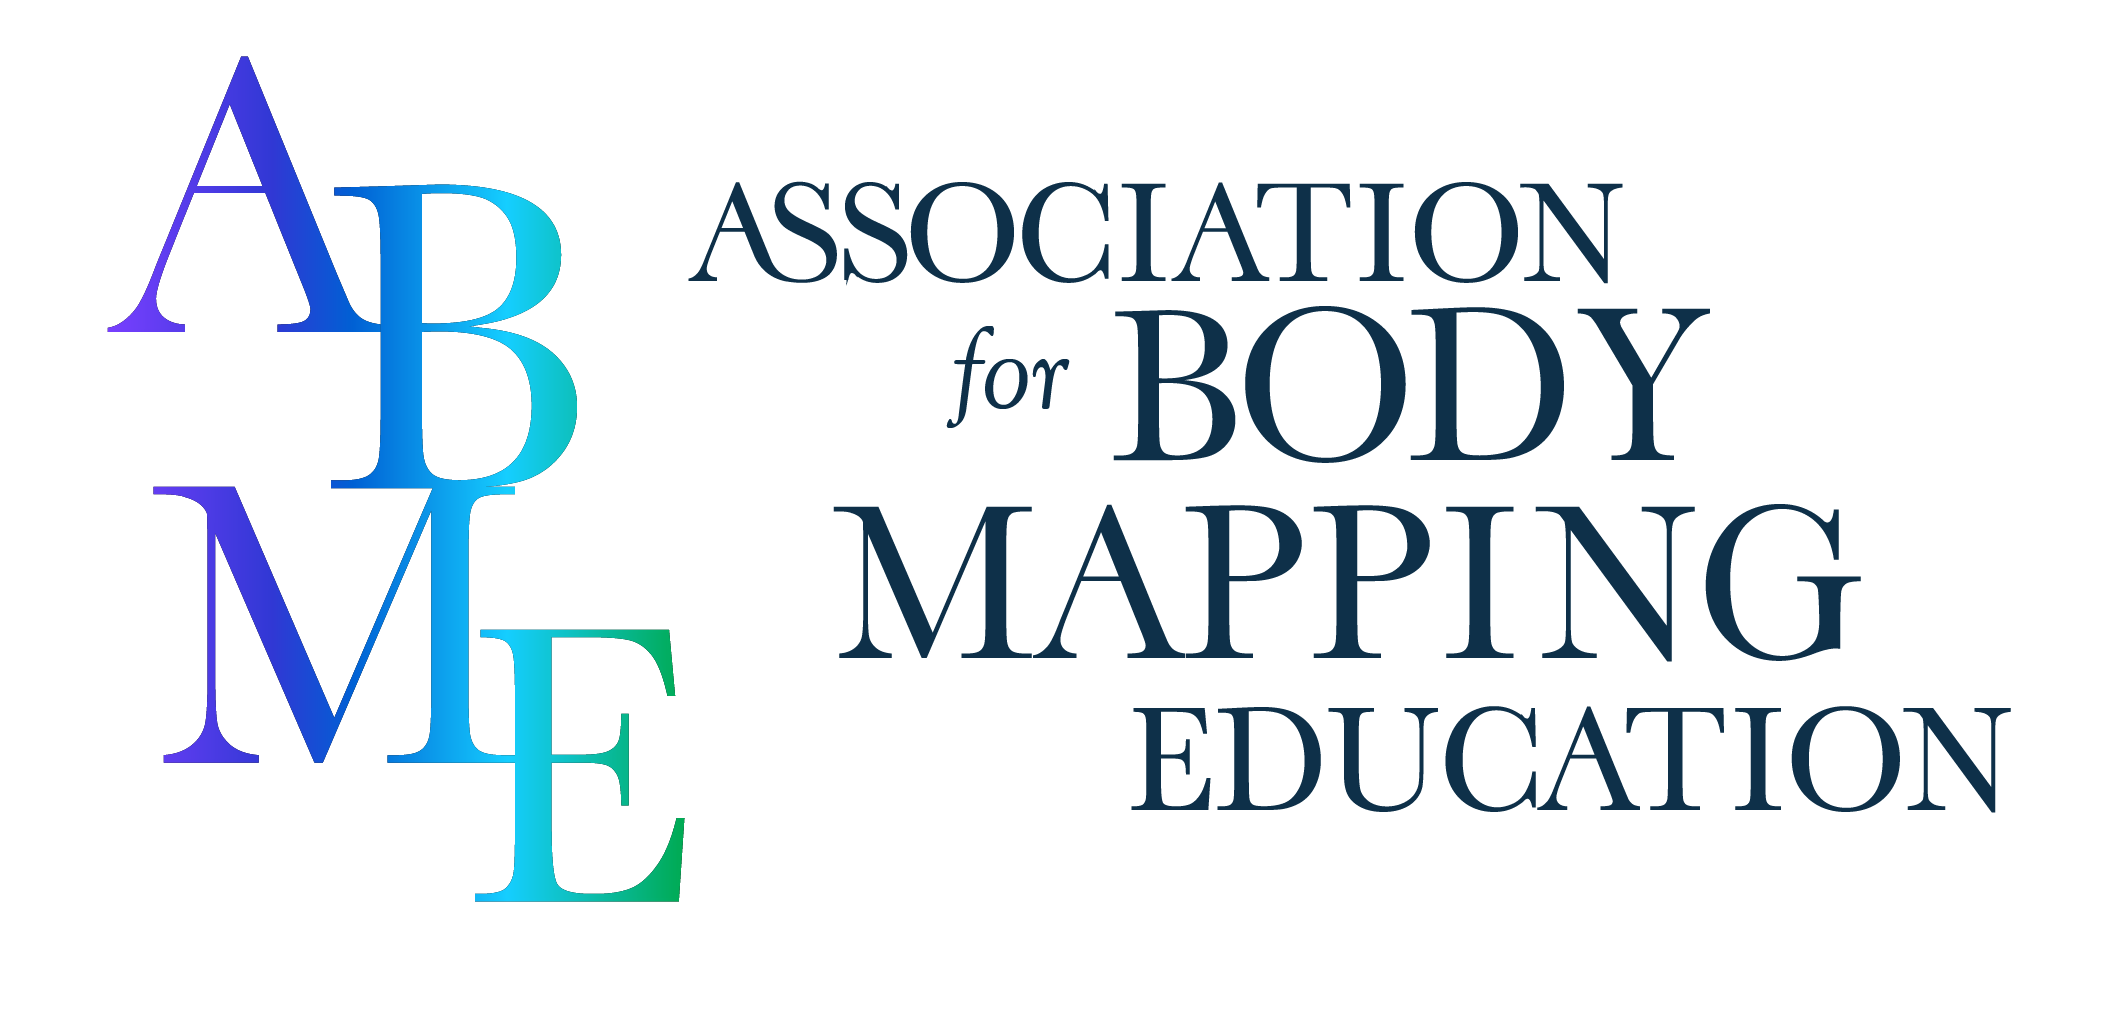 Association for Body Mapping Education logo